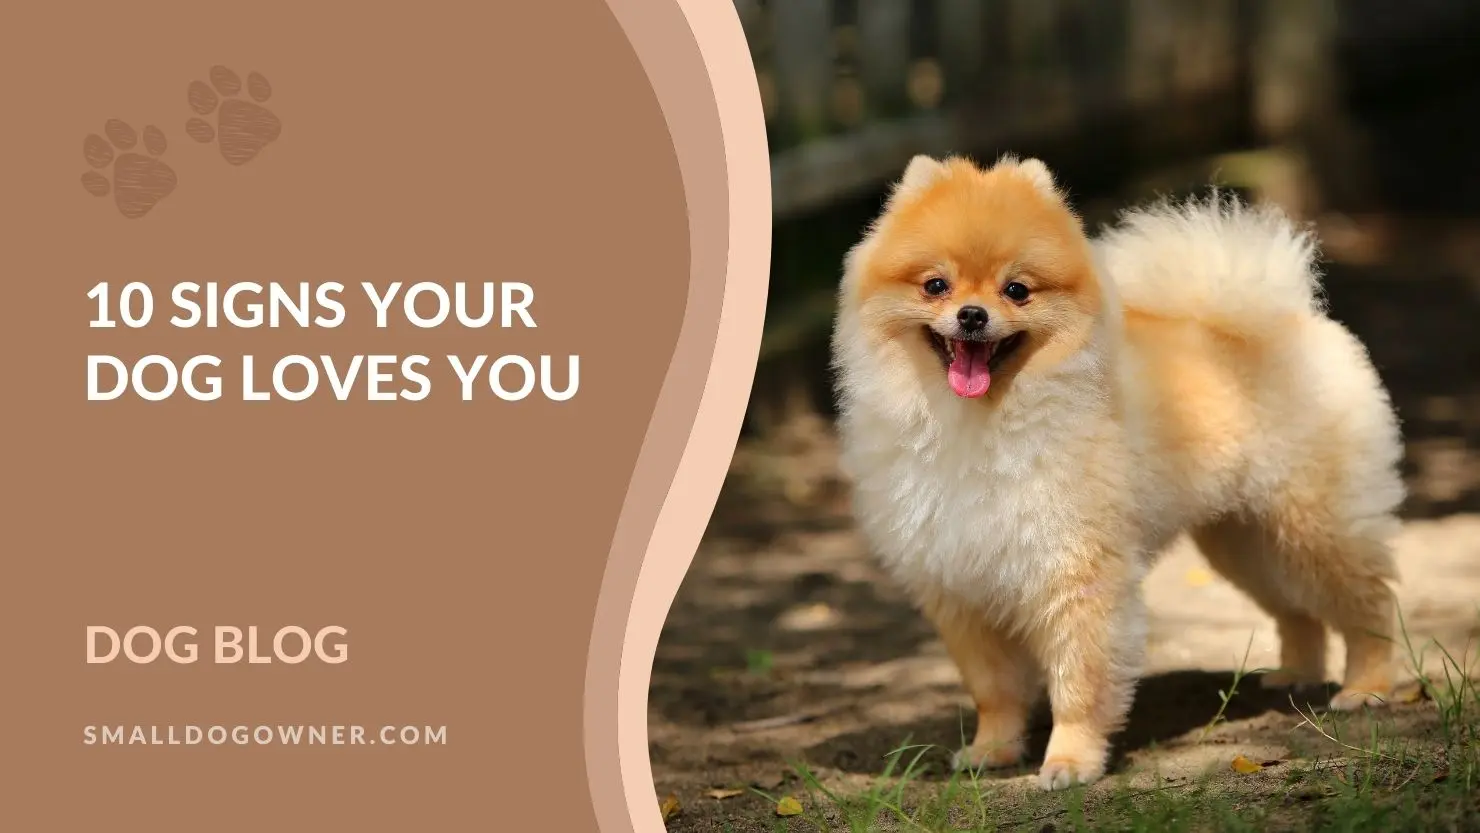 10 signs your dog loves you